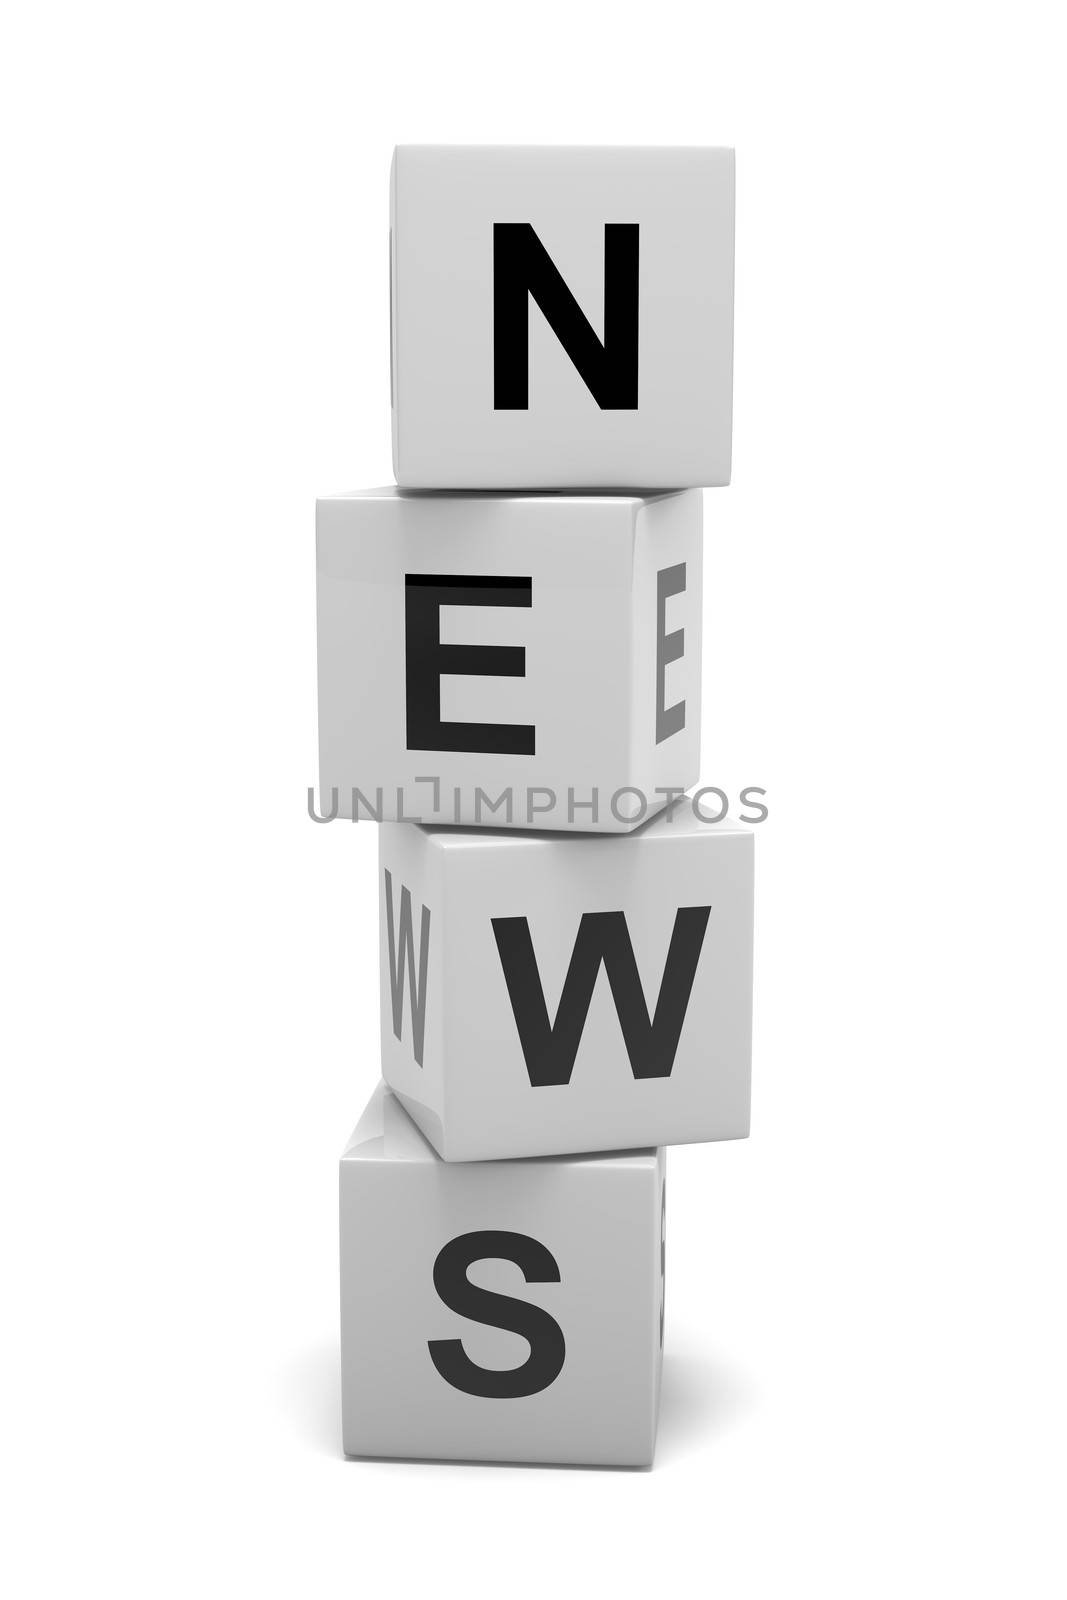 Heap of White Cubes with Text 3D Illustration News Concept